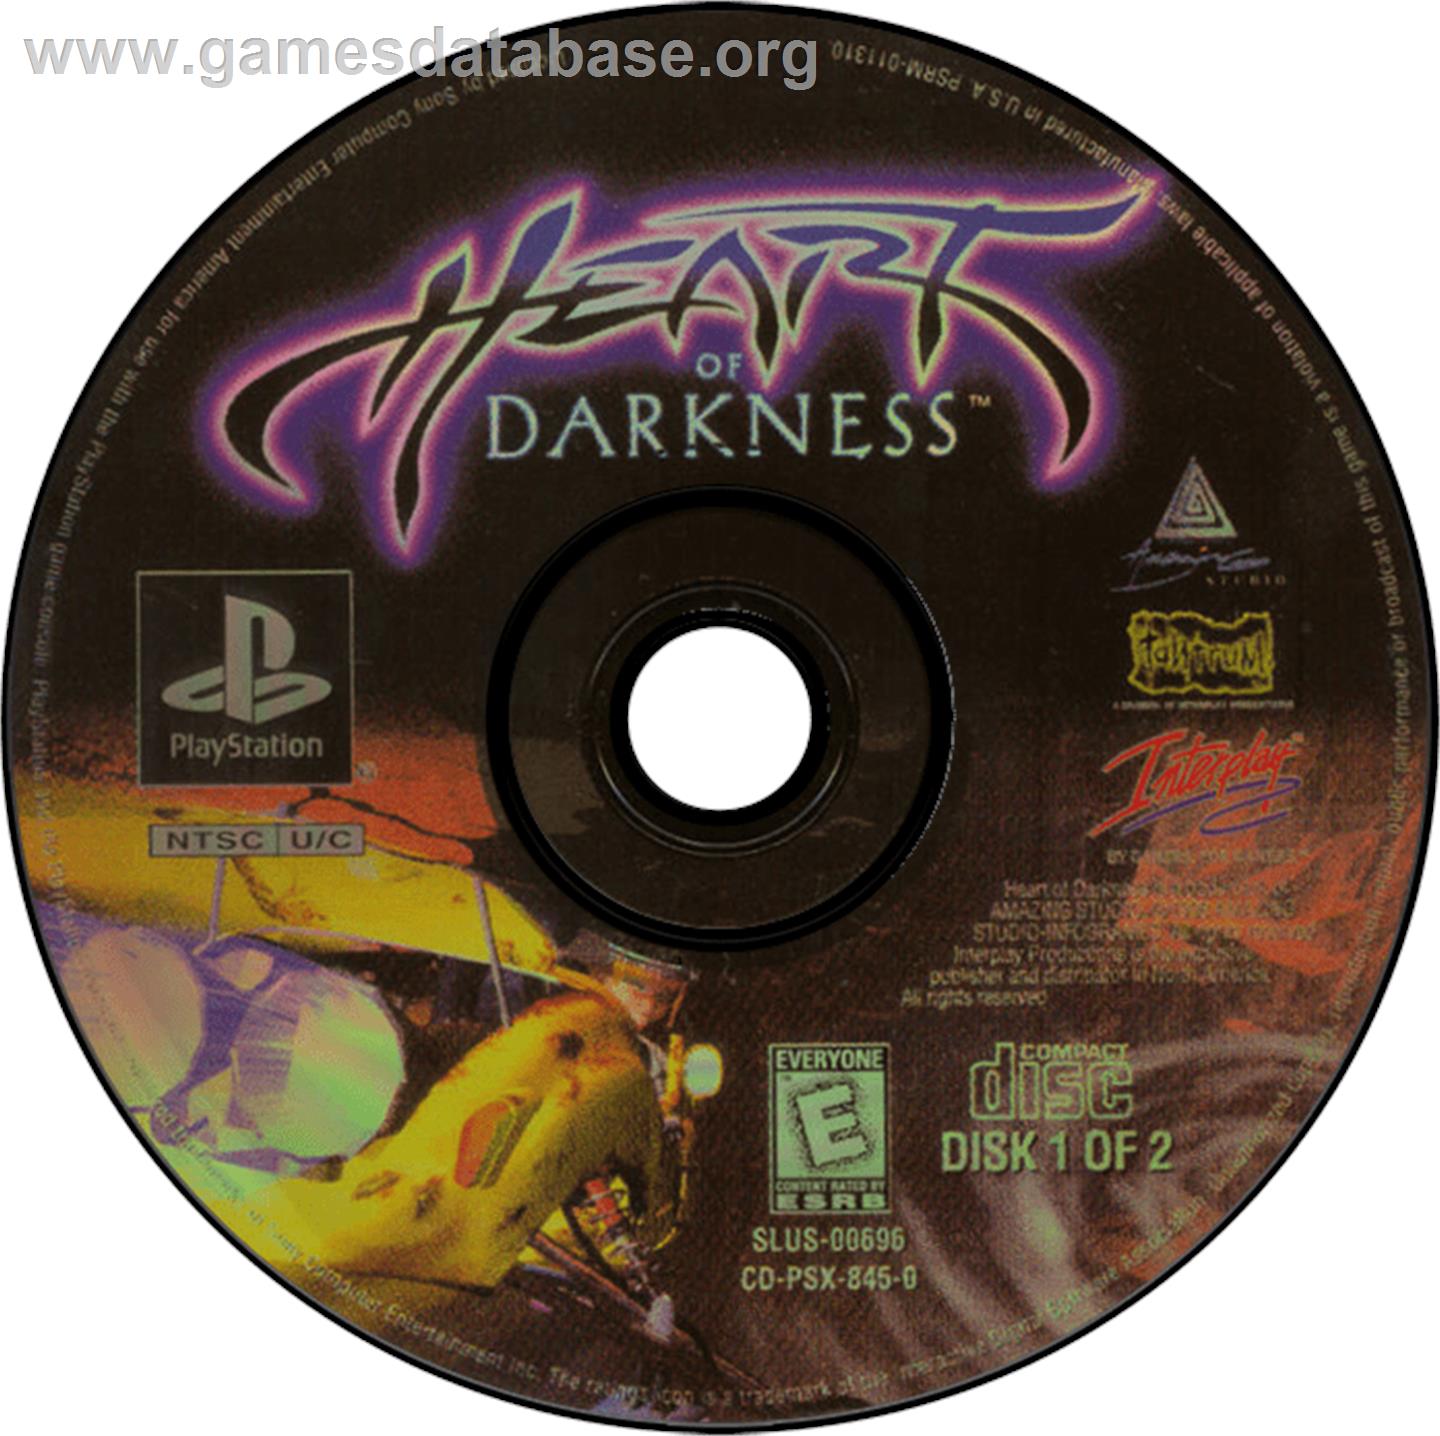 Heart of Darkness - Sony Playstation - Artwork - Disc